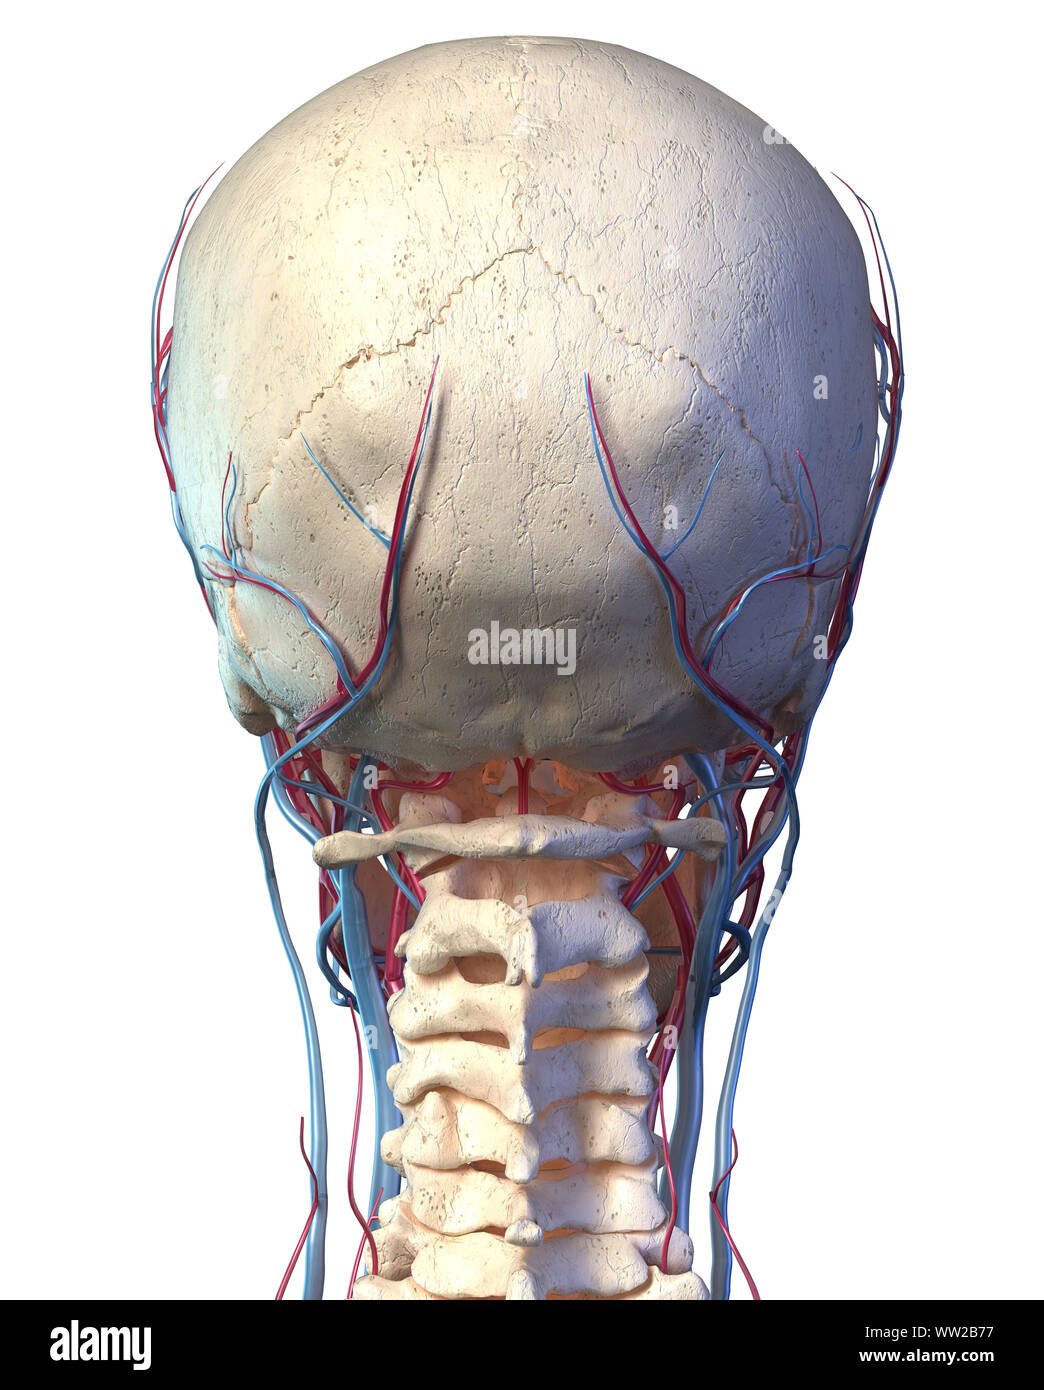 Vascular System Of The Human Head Viewed From The Back Computer 3d Rendering Artwork On White Background Stock Photo Alamy